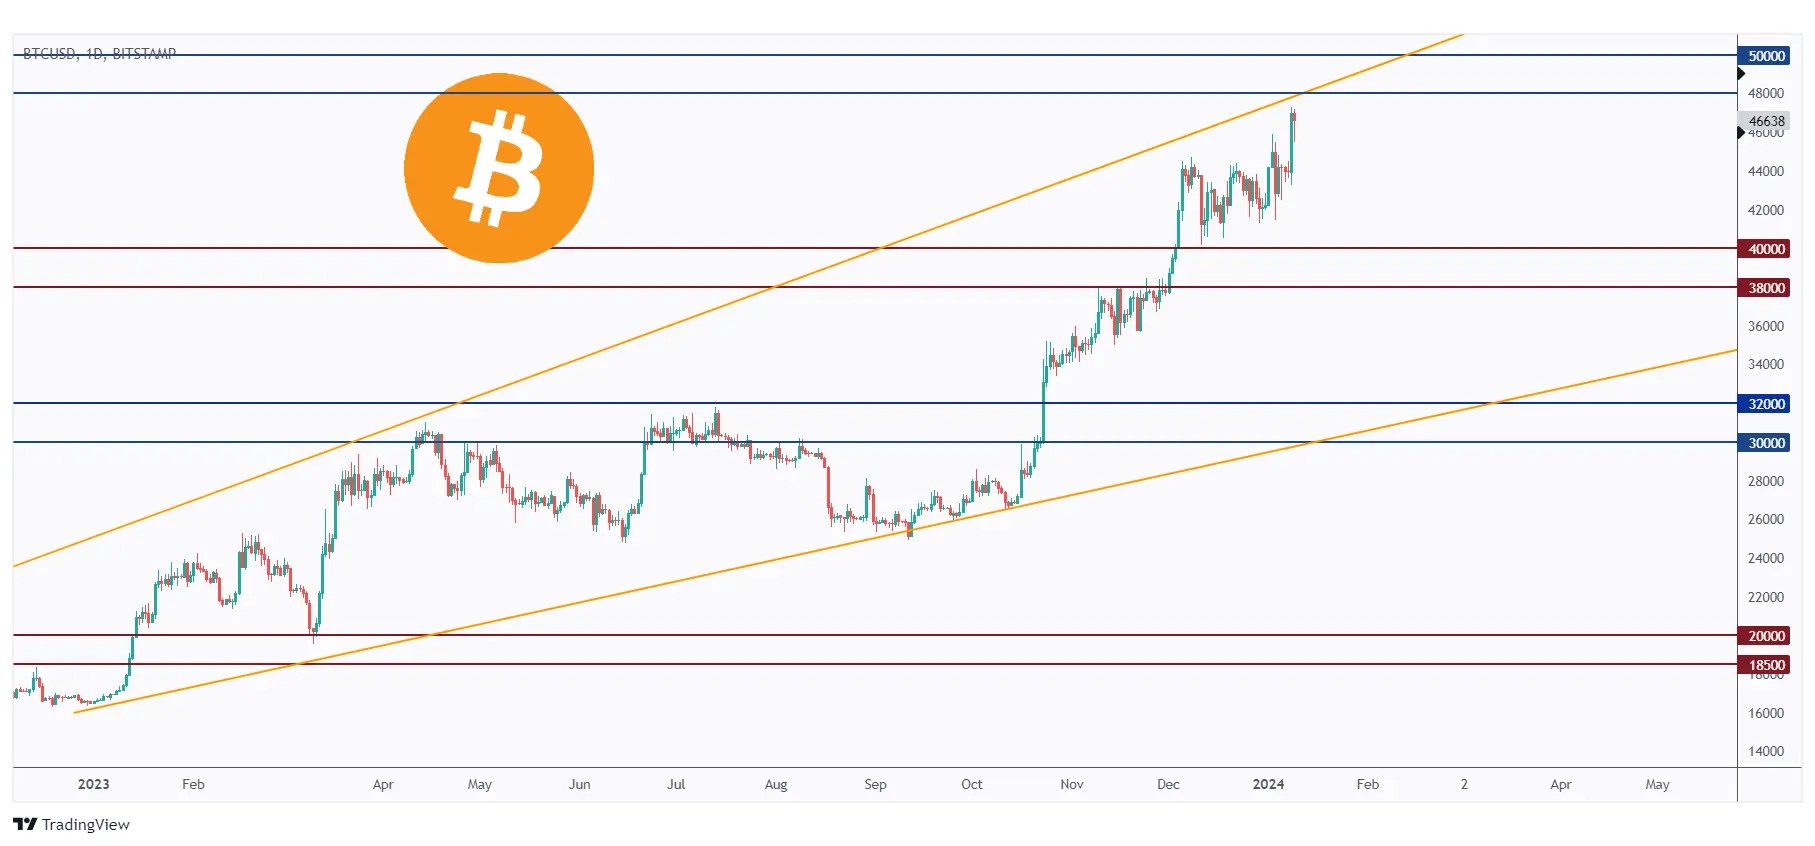 Bitcoin daily chart showing that it is getting over-bought around the upper bound of the wedge pattern and 50k resistance.